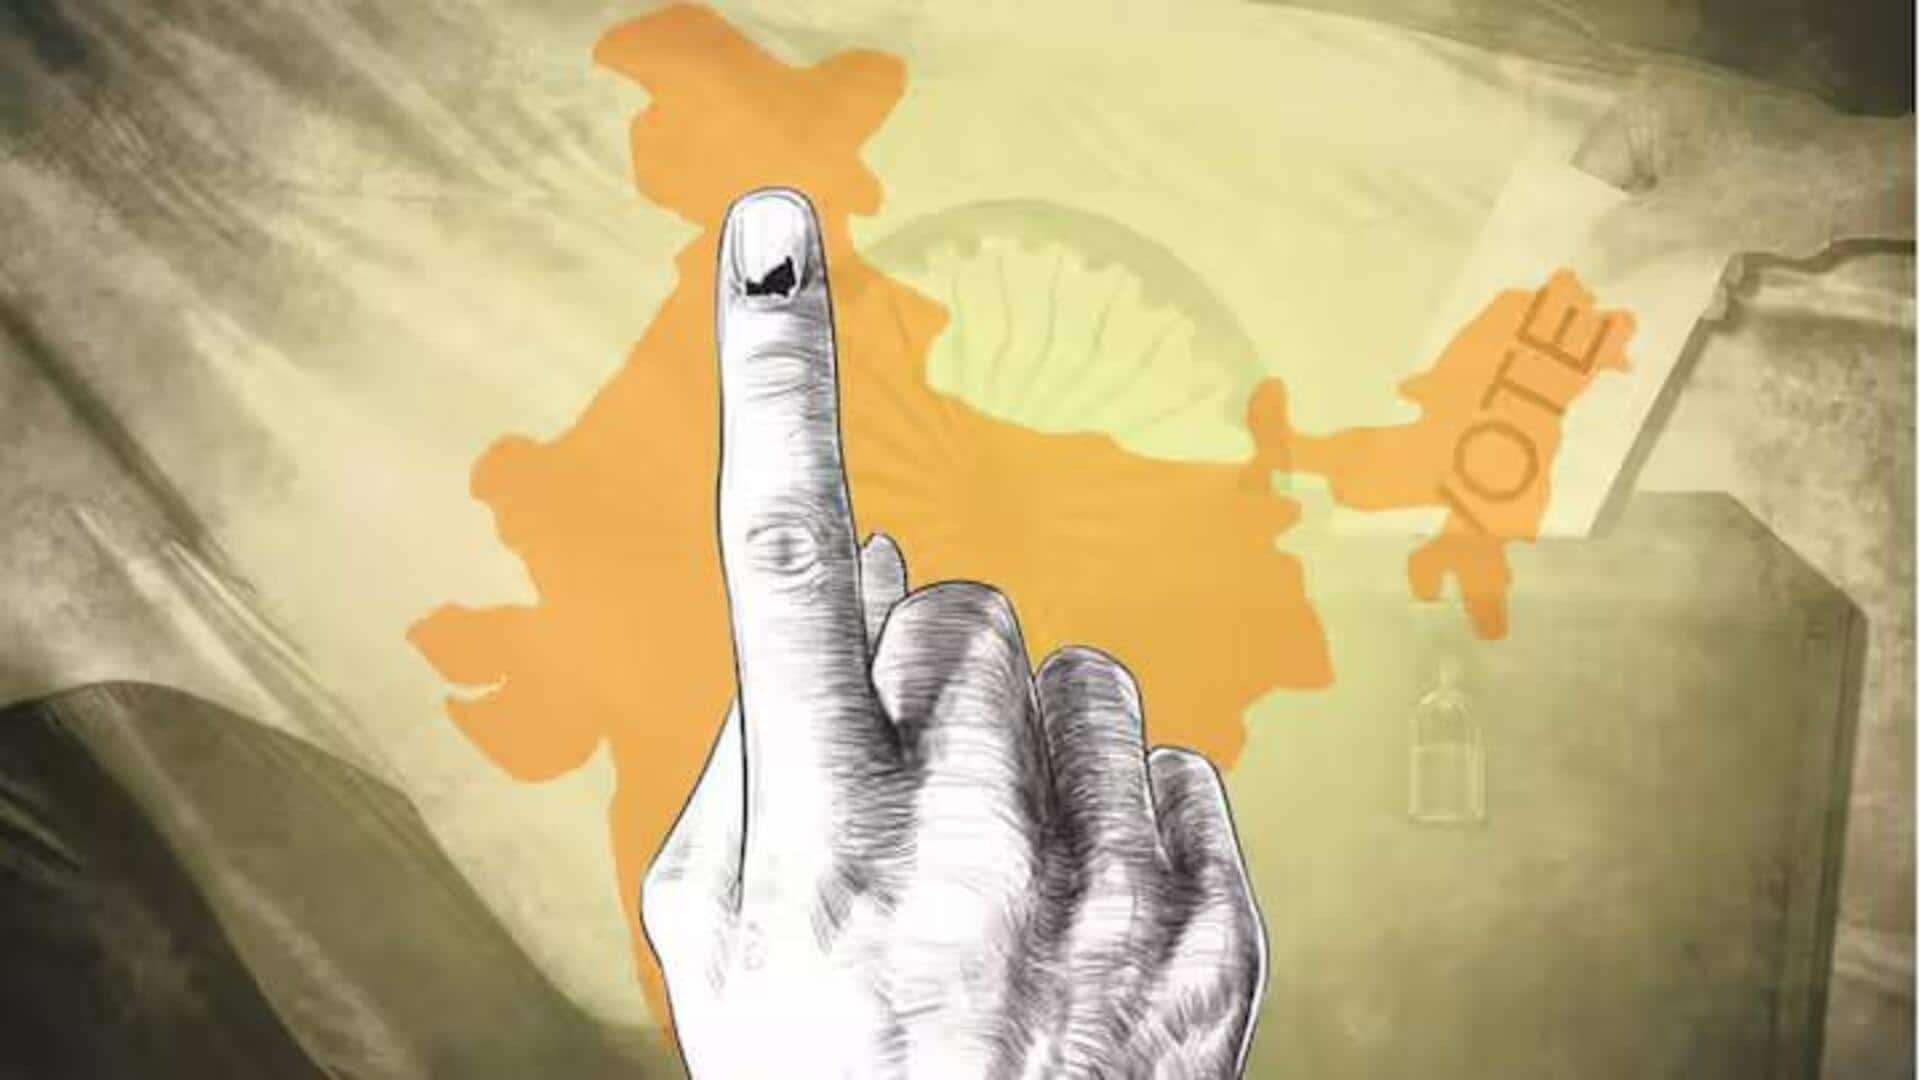 Explained: Declining voter confidence in independent Lok Sabha candidates